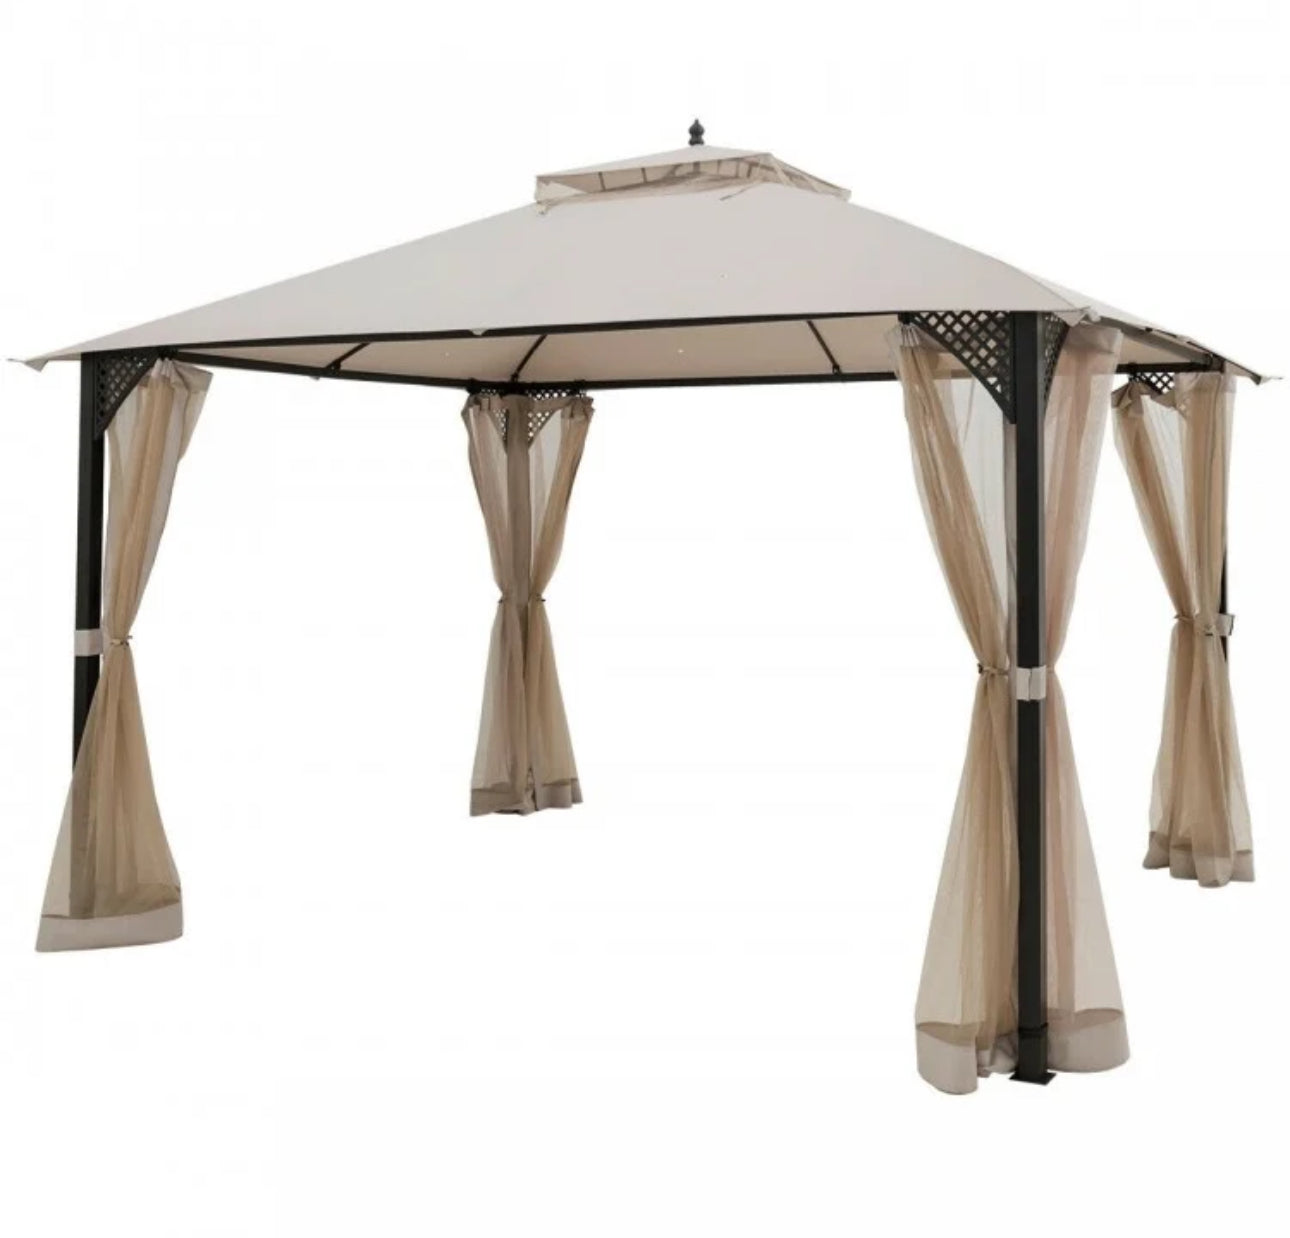 Elegant Heavy Duty Sturdy Design 12x10 FT Outdoor Double Top Patio Gazebo With Netting | Double Vented Roof | Sun-Proof & Waterproof Design